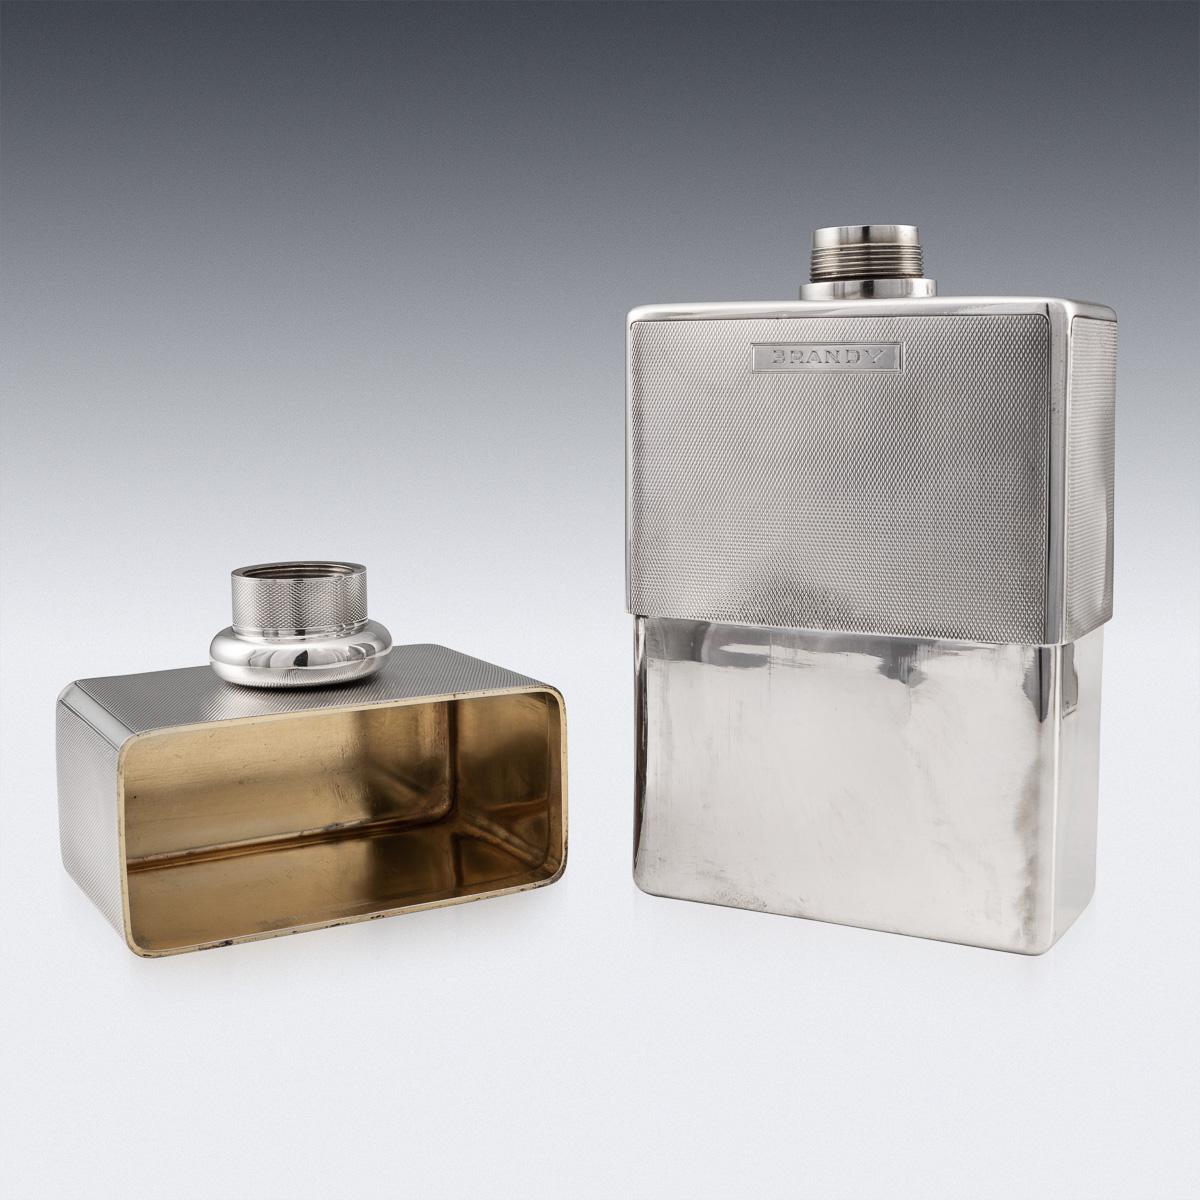 20th Century English Solid Silver Cased Perfume Bottles, London, c.1922 5